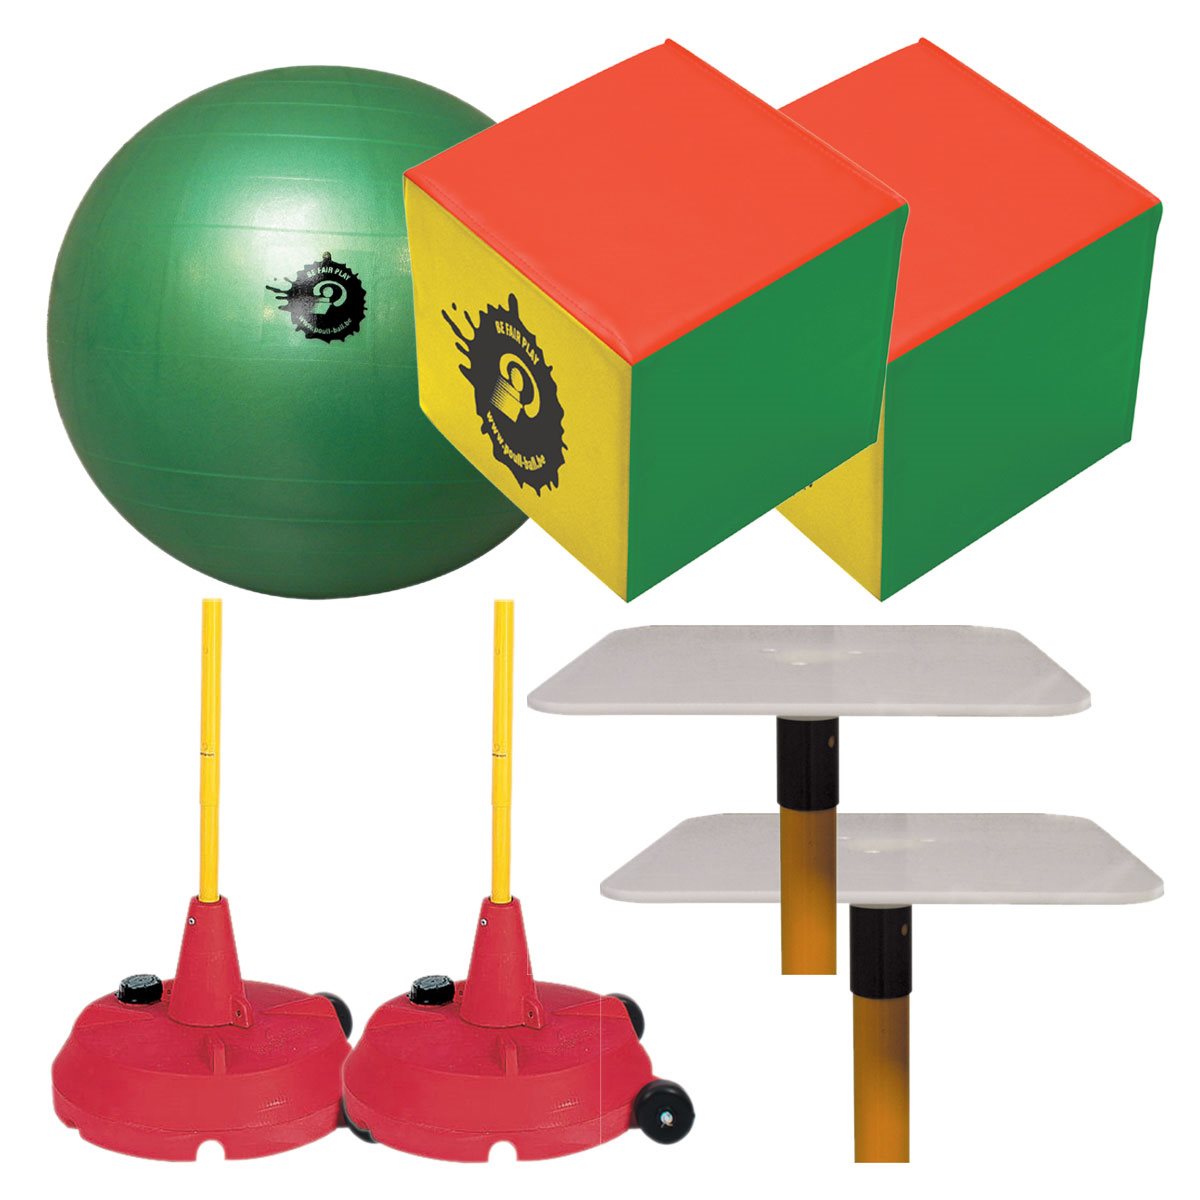 ﻿Official Poull-Ball Set